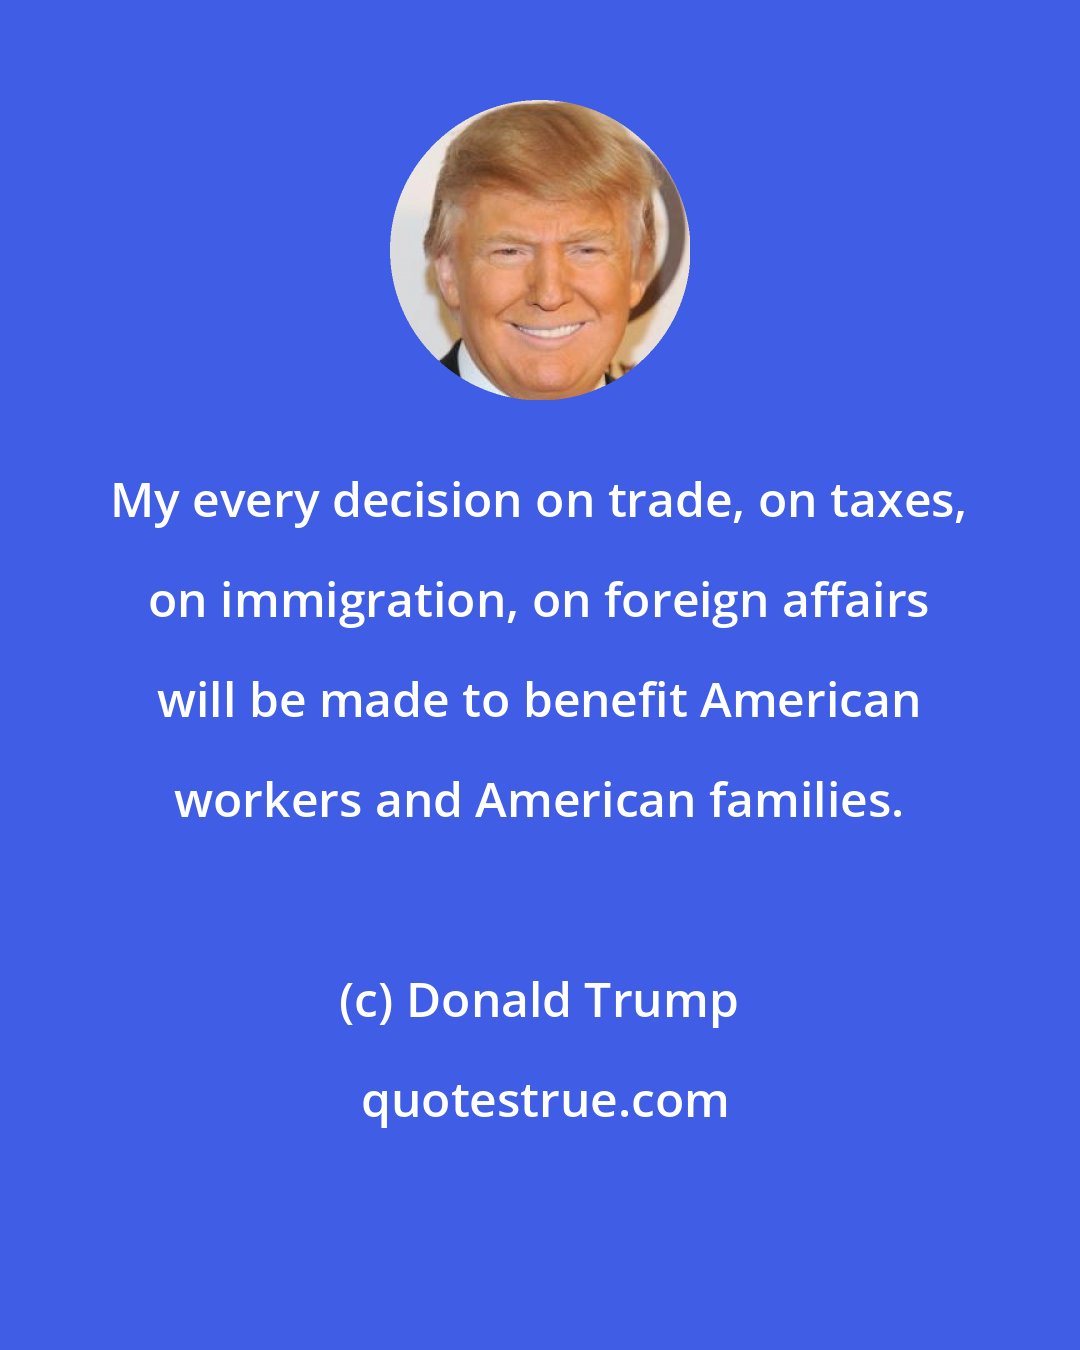 Donald Trump: My every decision on trade, on taxes, on immigration, on foreign affairs will be made to benefit American workers and American families.